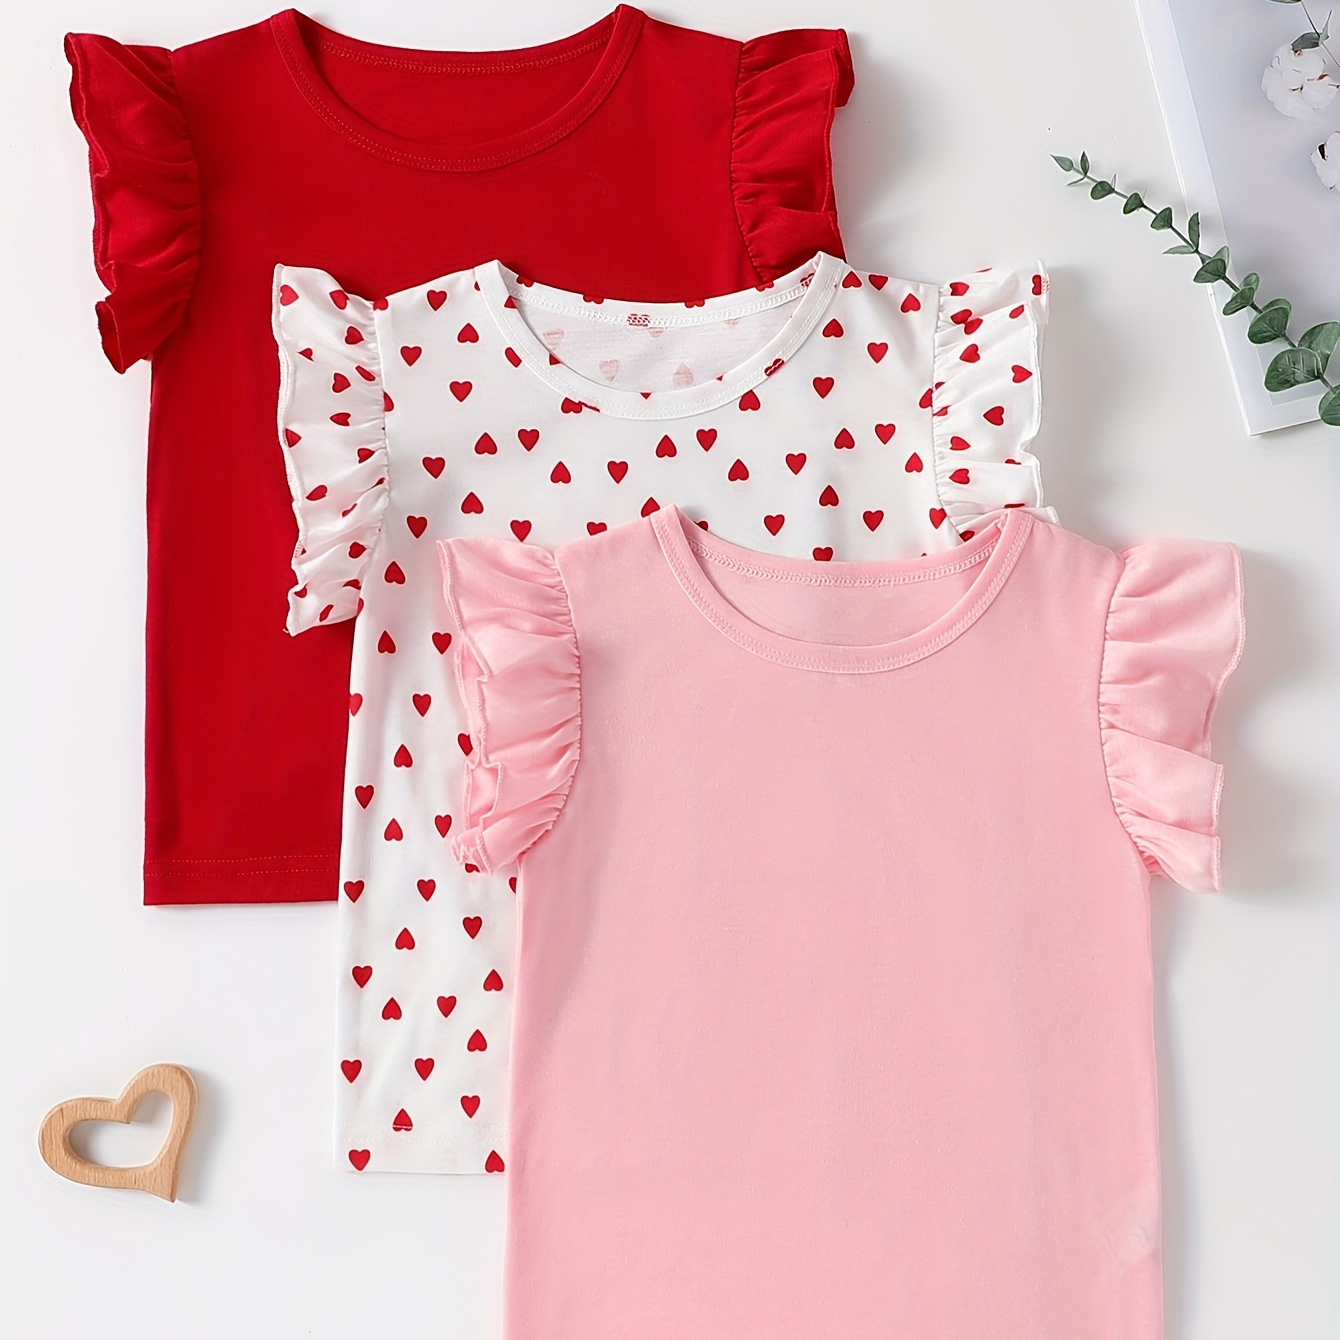 

3pcs Girls Sweet Heart Graphic Solid Ruffle Trim T-shirt Set For Summer Party Valentine's Day Gift